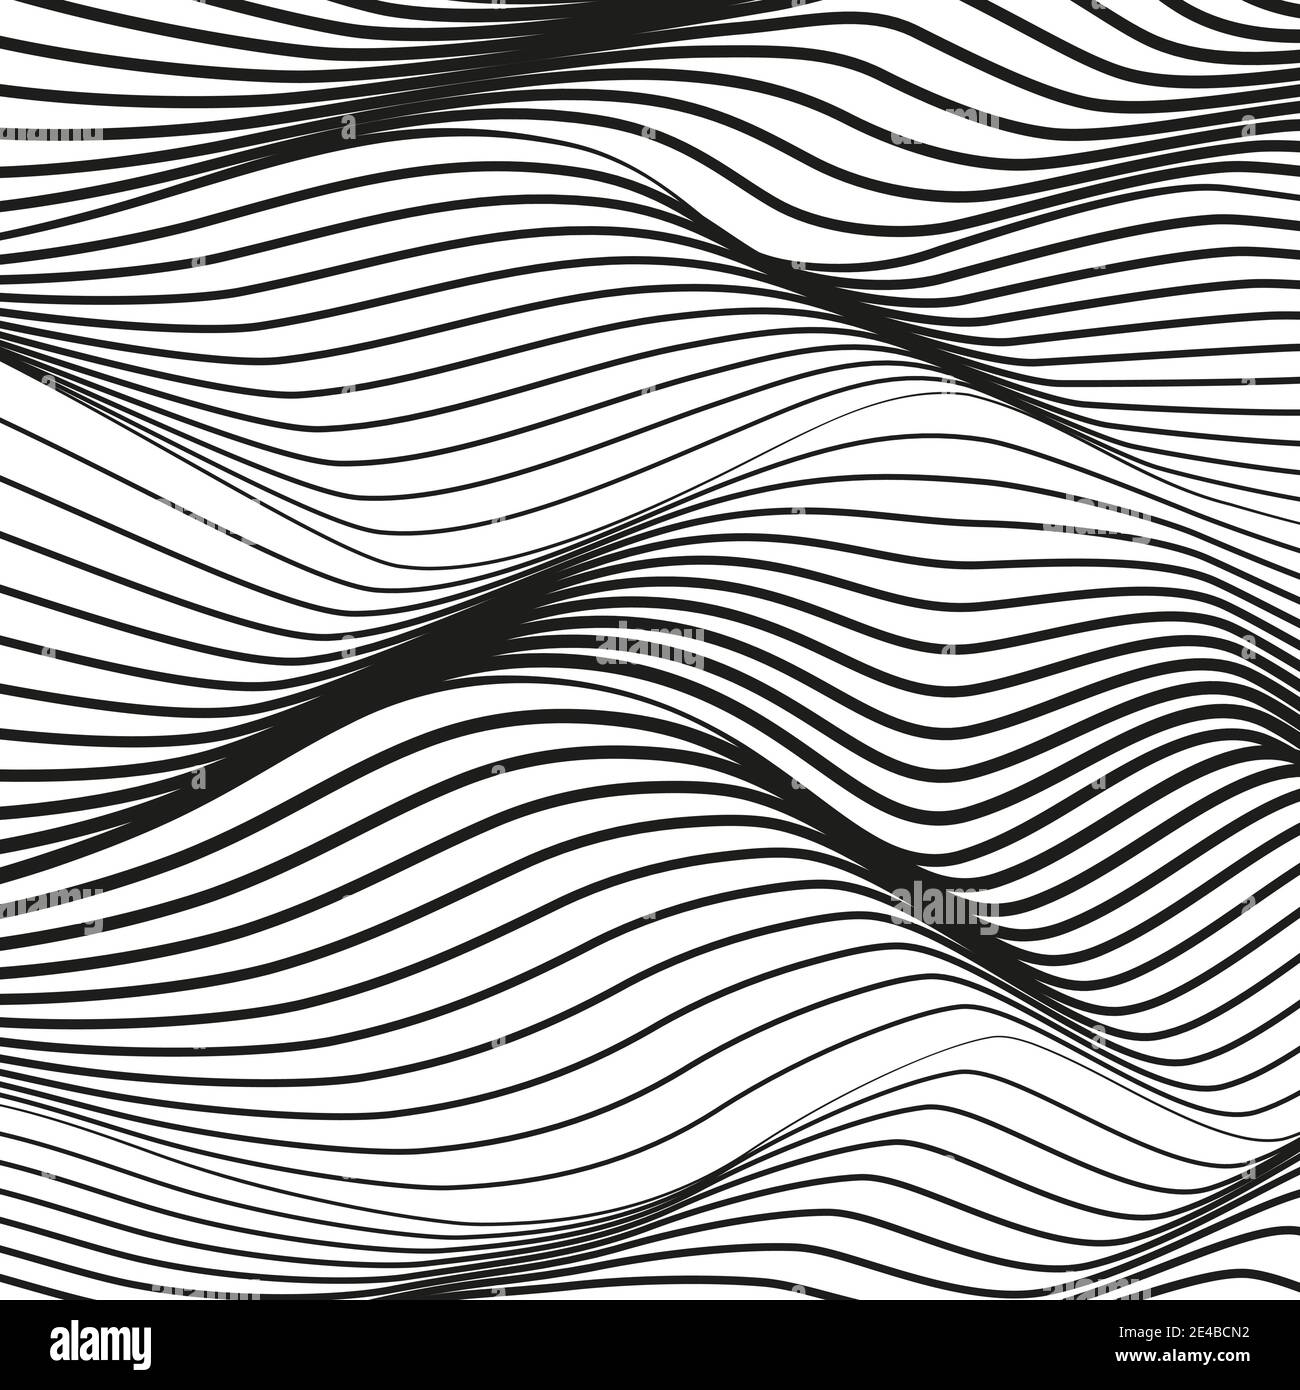 Vector monochrome striped background. Deformed black lines on white surface. Abstract op art pattern. Ripple, warped, wavy lines. Tech design. EPS10 Stock Vector